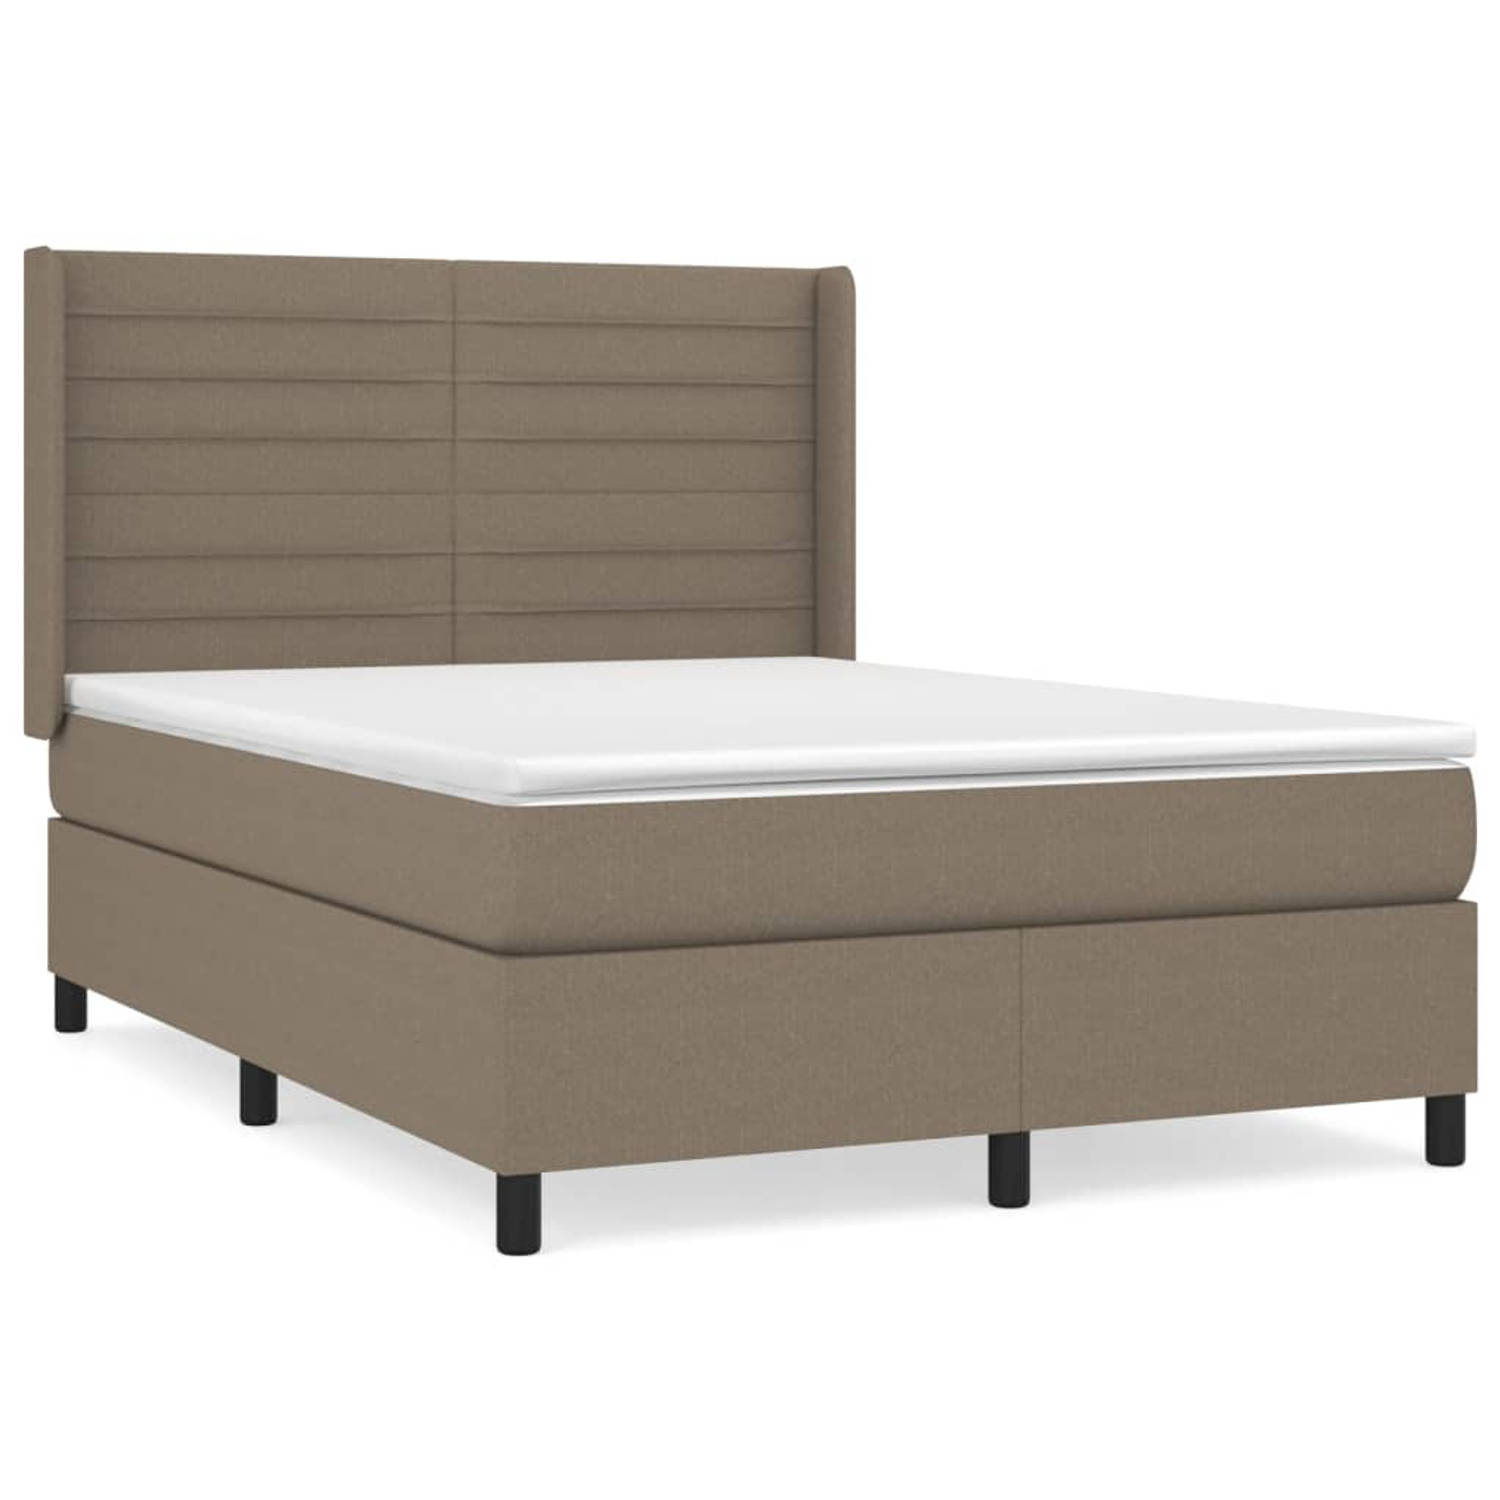 The Living Store Boxspringbed - Comfort Plus - Bed - 193x147x118/128 cm - Taupe